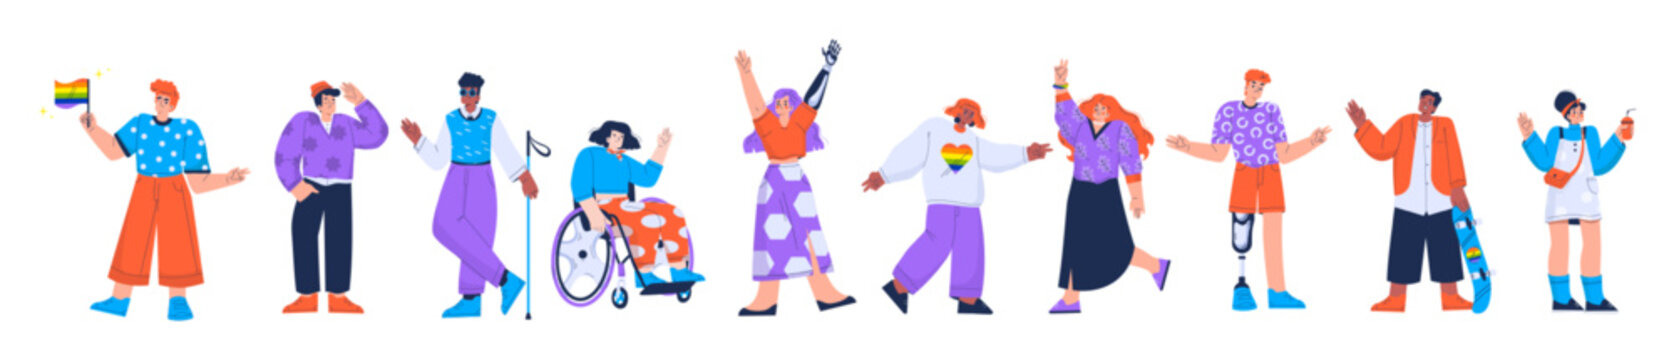 Diverse people with disabilities, lgbt persons, multiracial group. Girl in wheelchair, man with prosthesis, blind man, people with rainbow flag isolated on white background, vector flat illustration